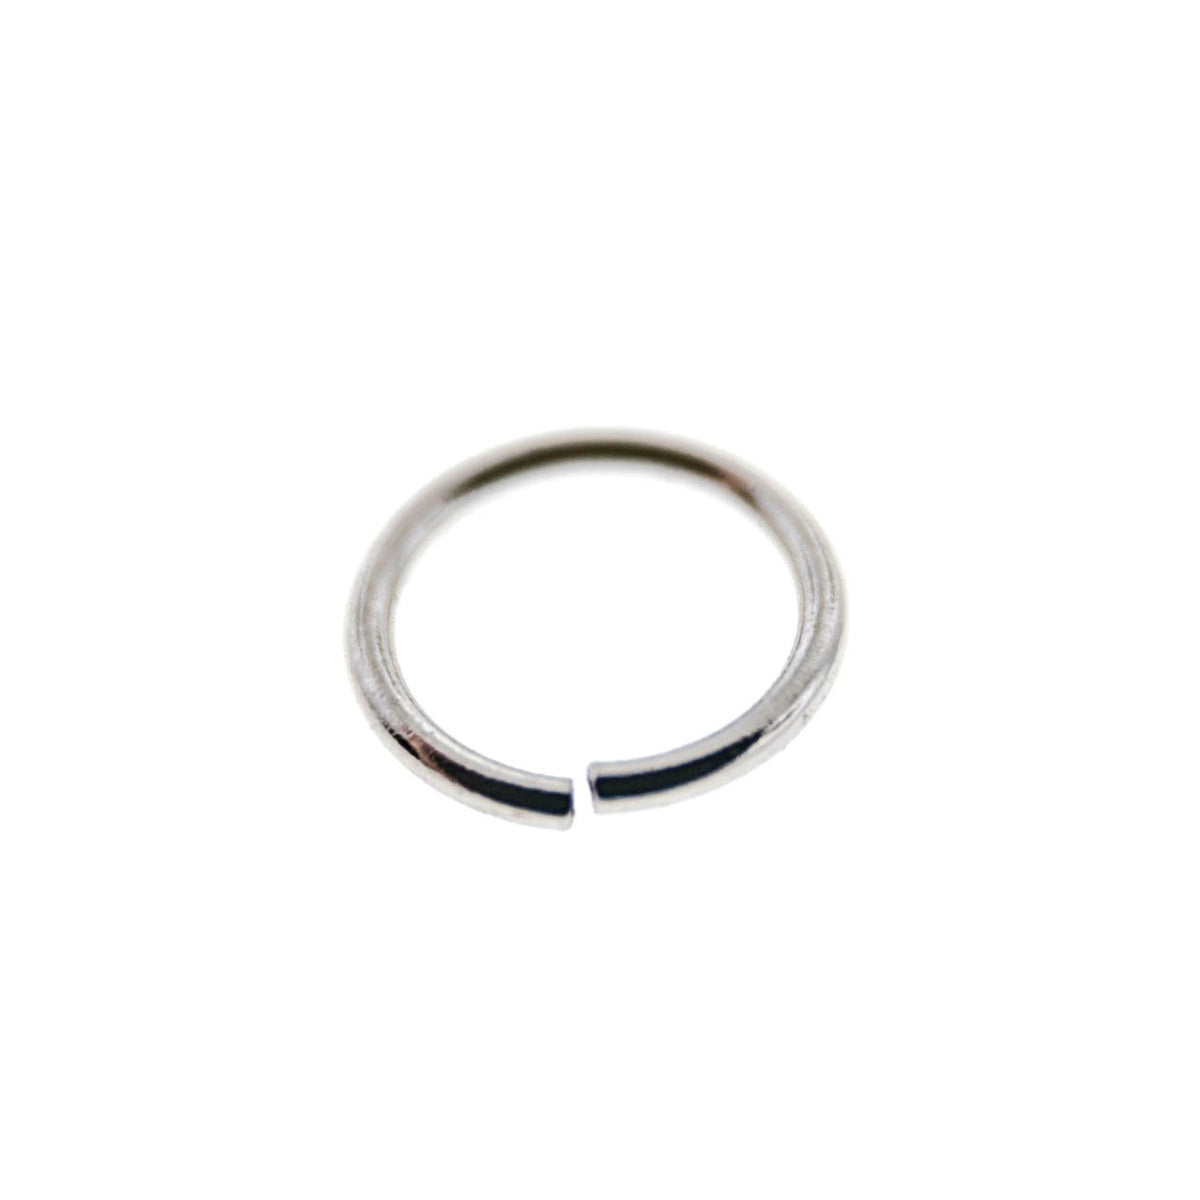 Where to find ring blanks??? : r/jewelrymaking